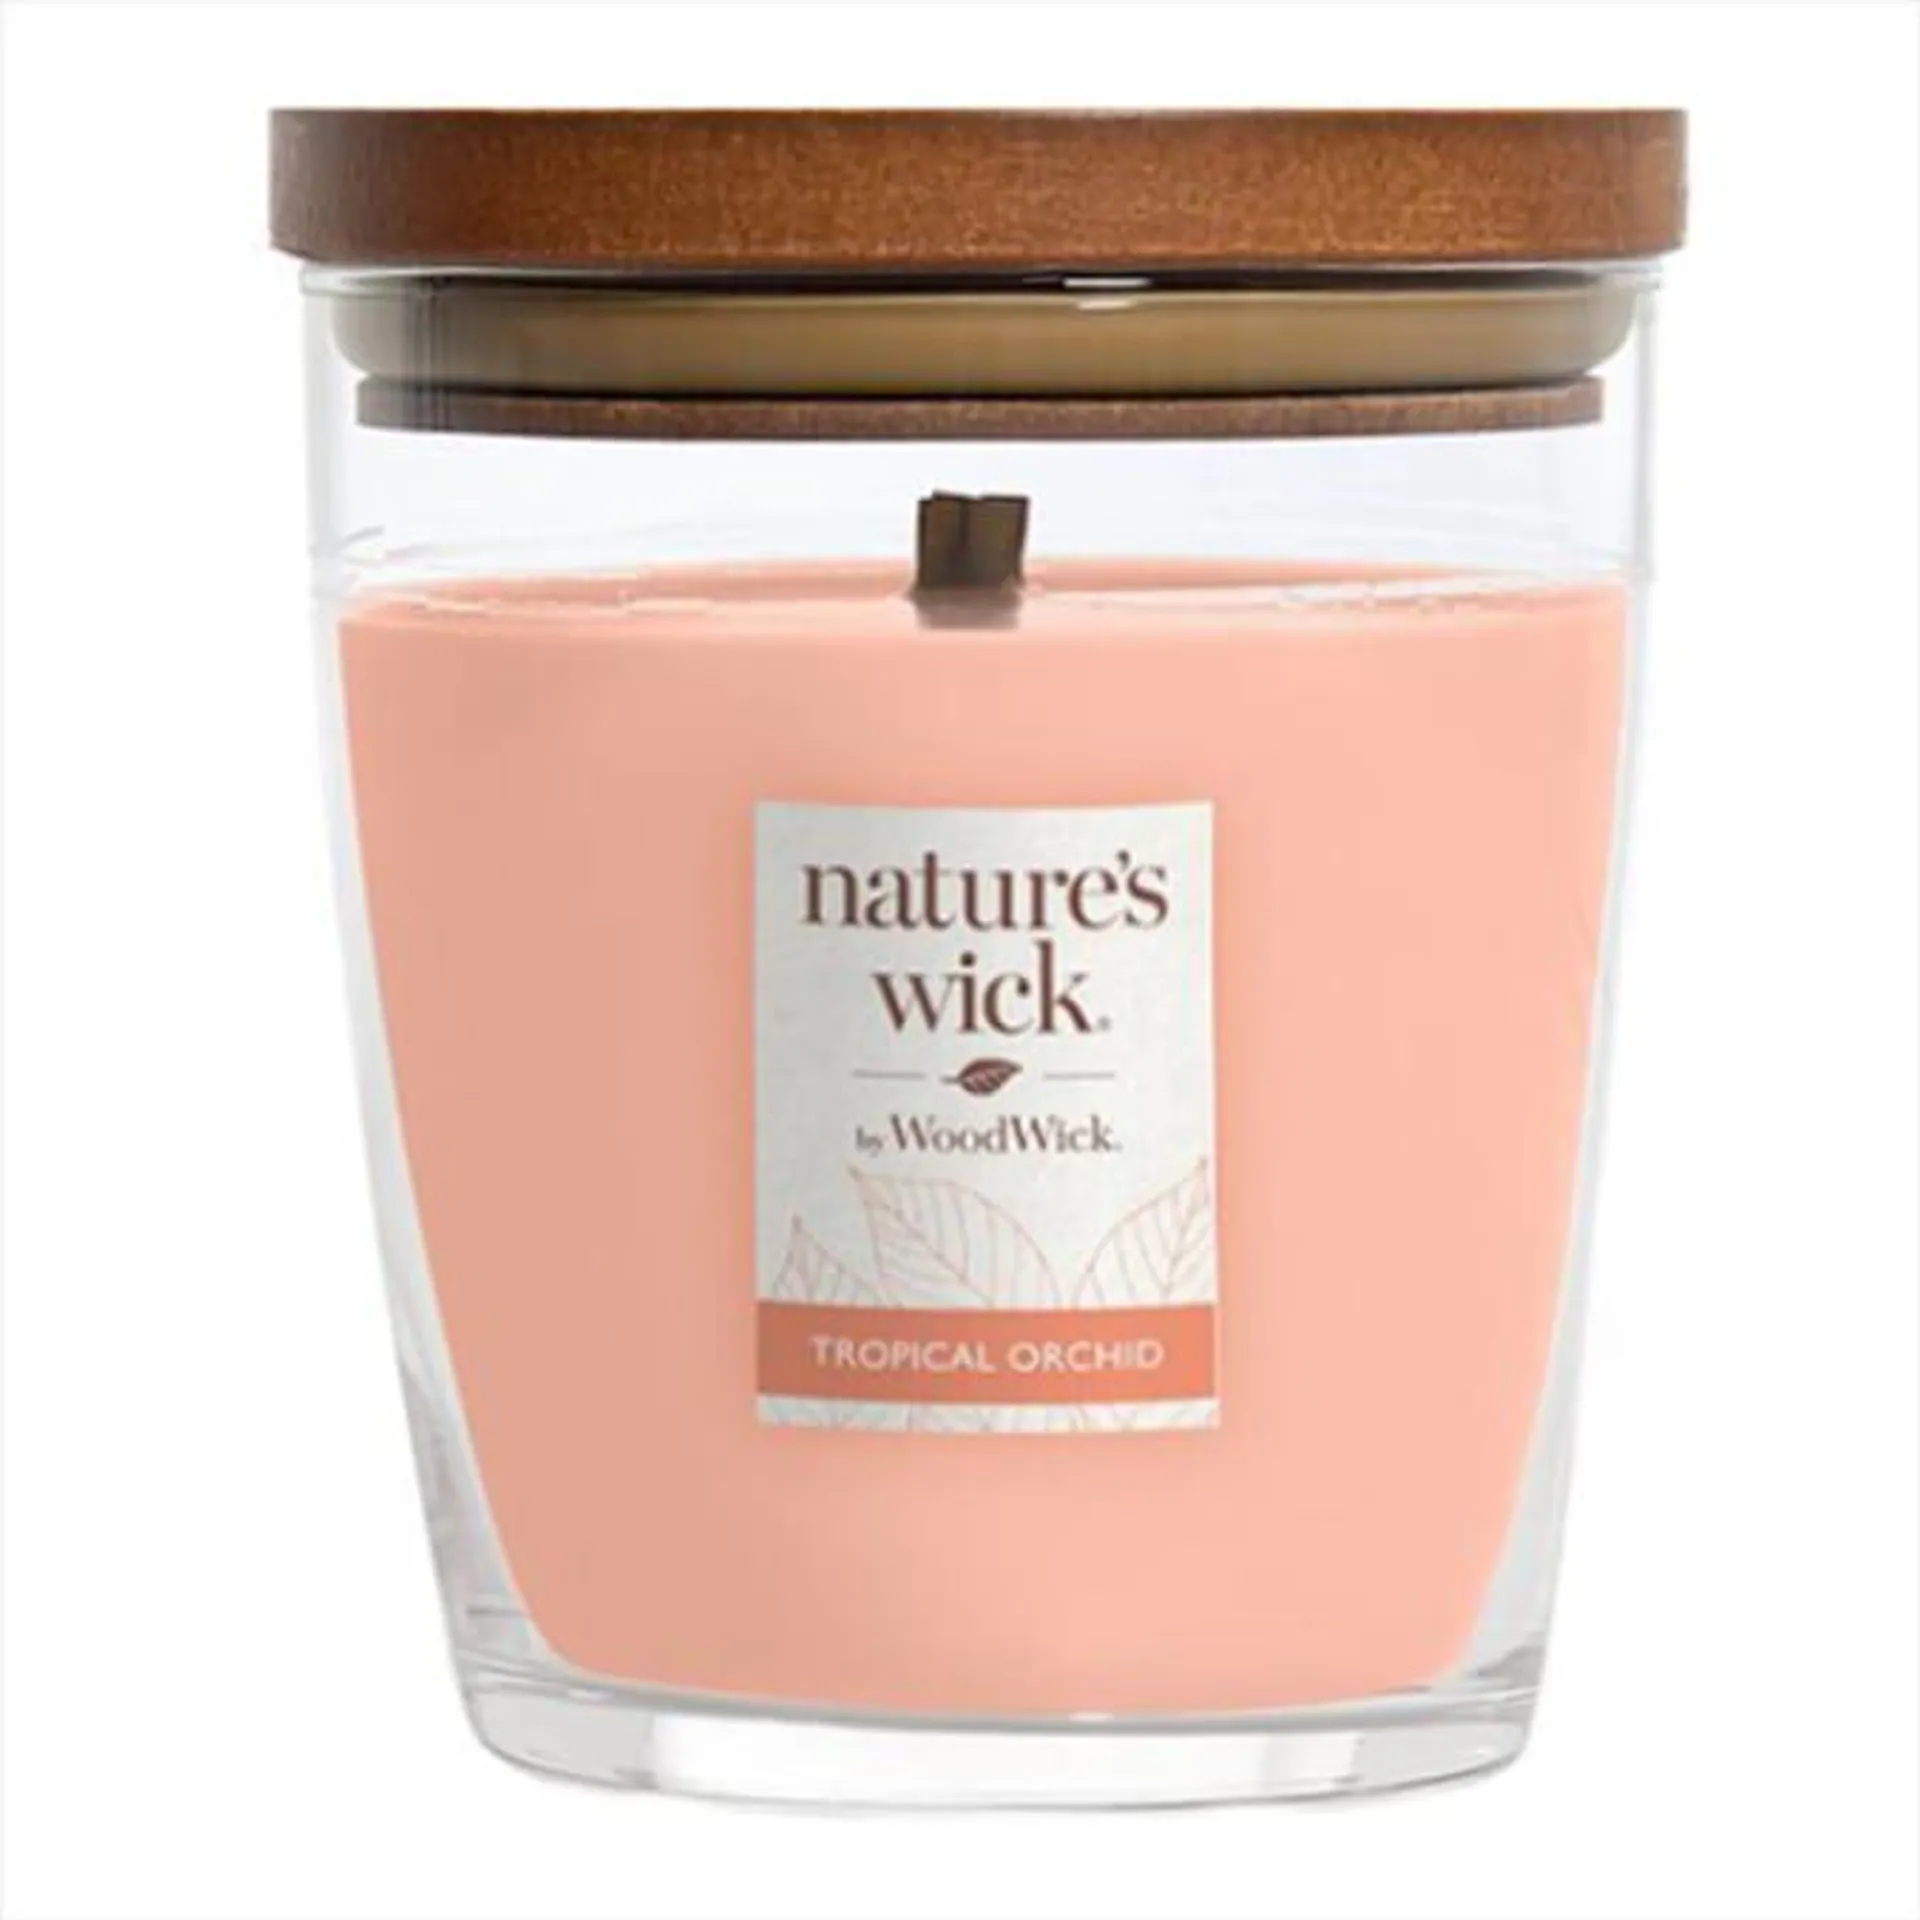 Nature's Wick Medium Candle - Tropical Orchid